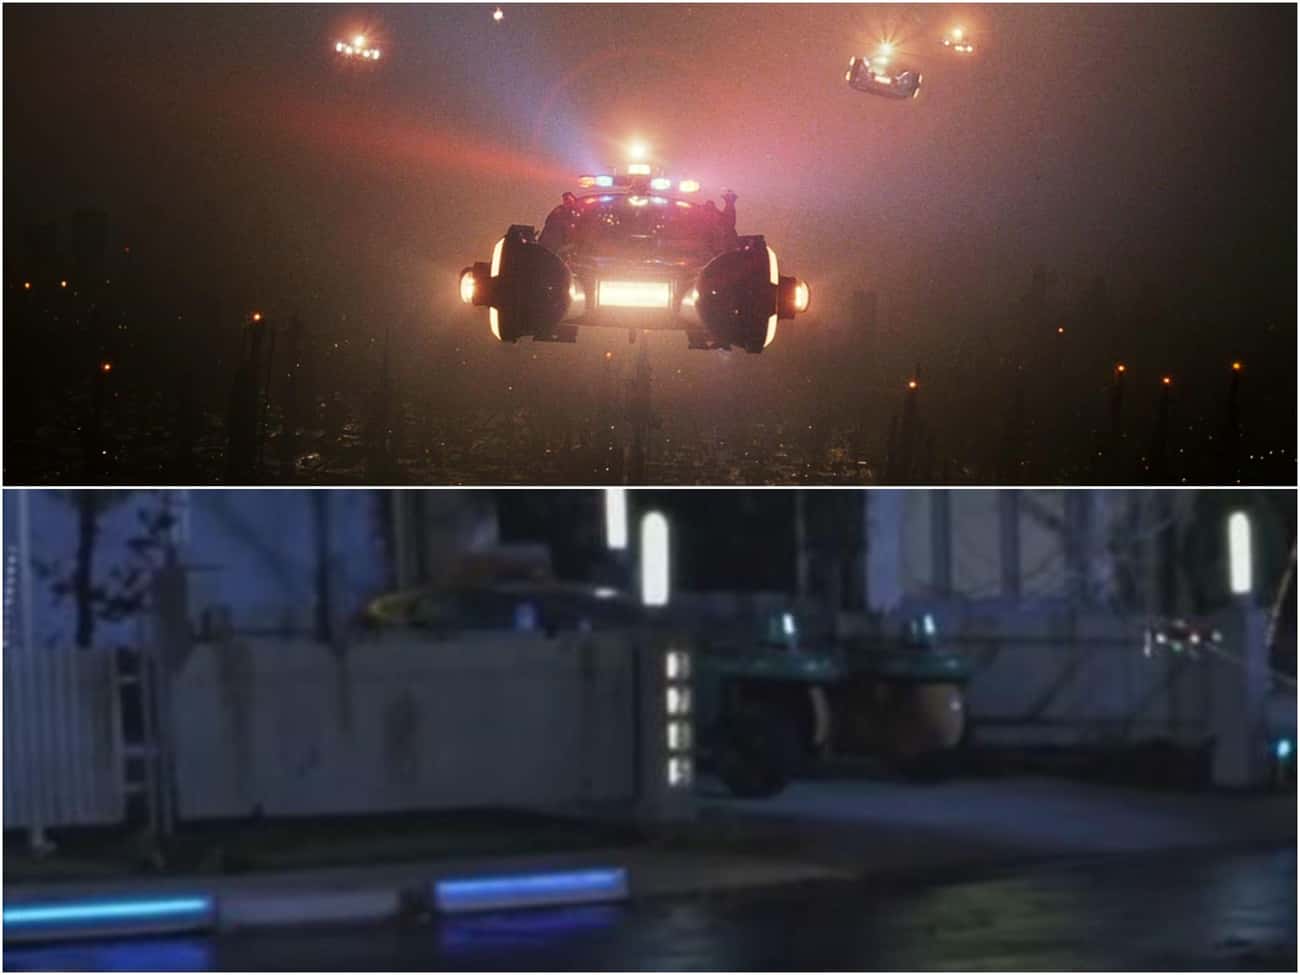 The Police Spinner From 'Blade Runner' And 'Back to the Future II'